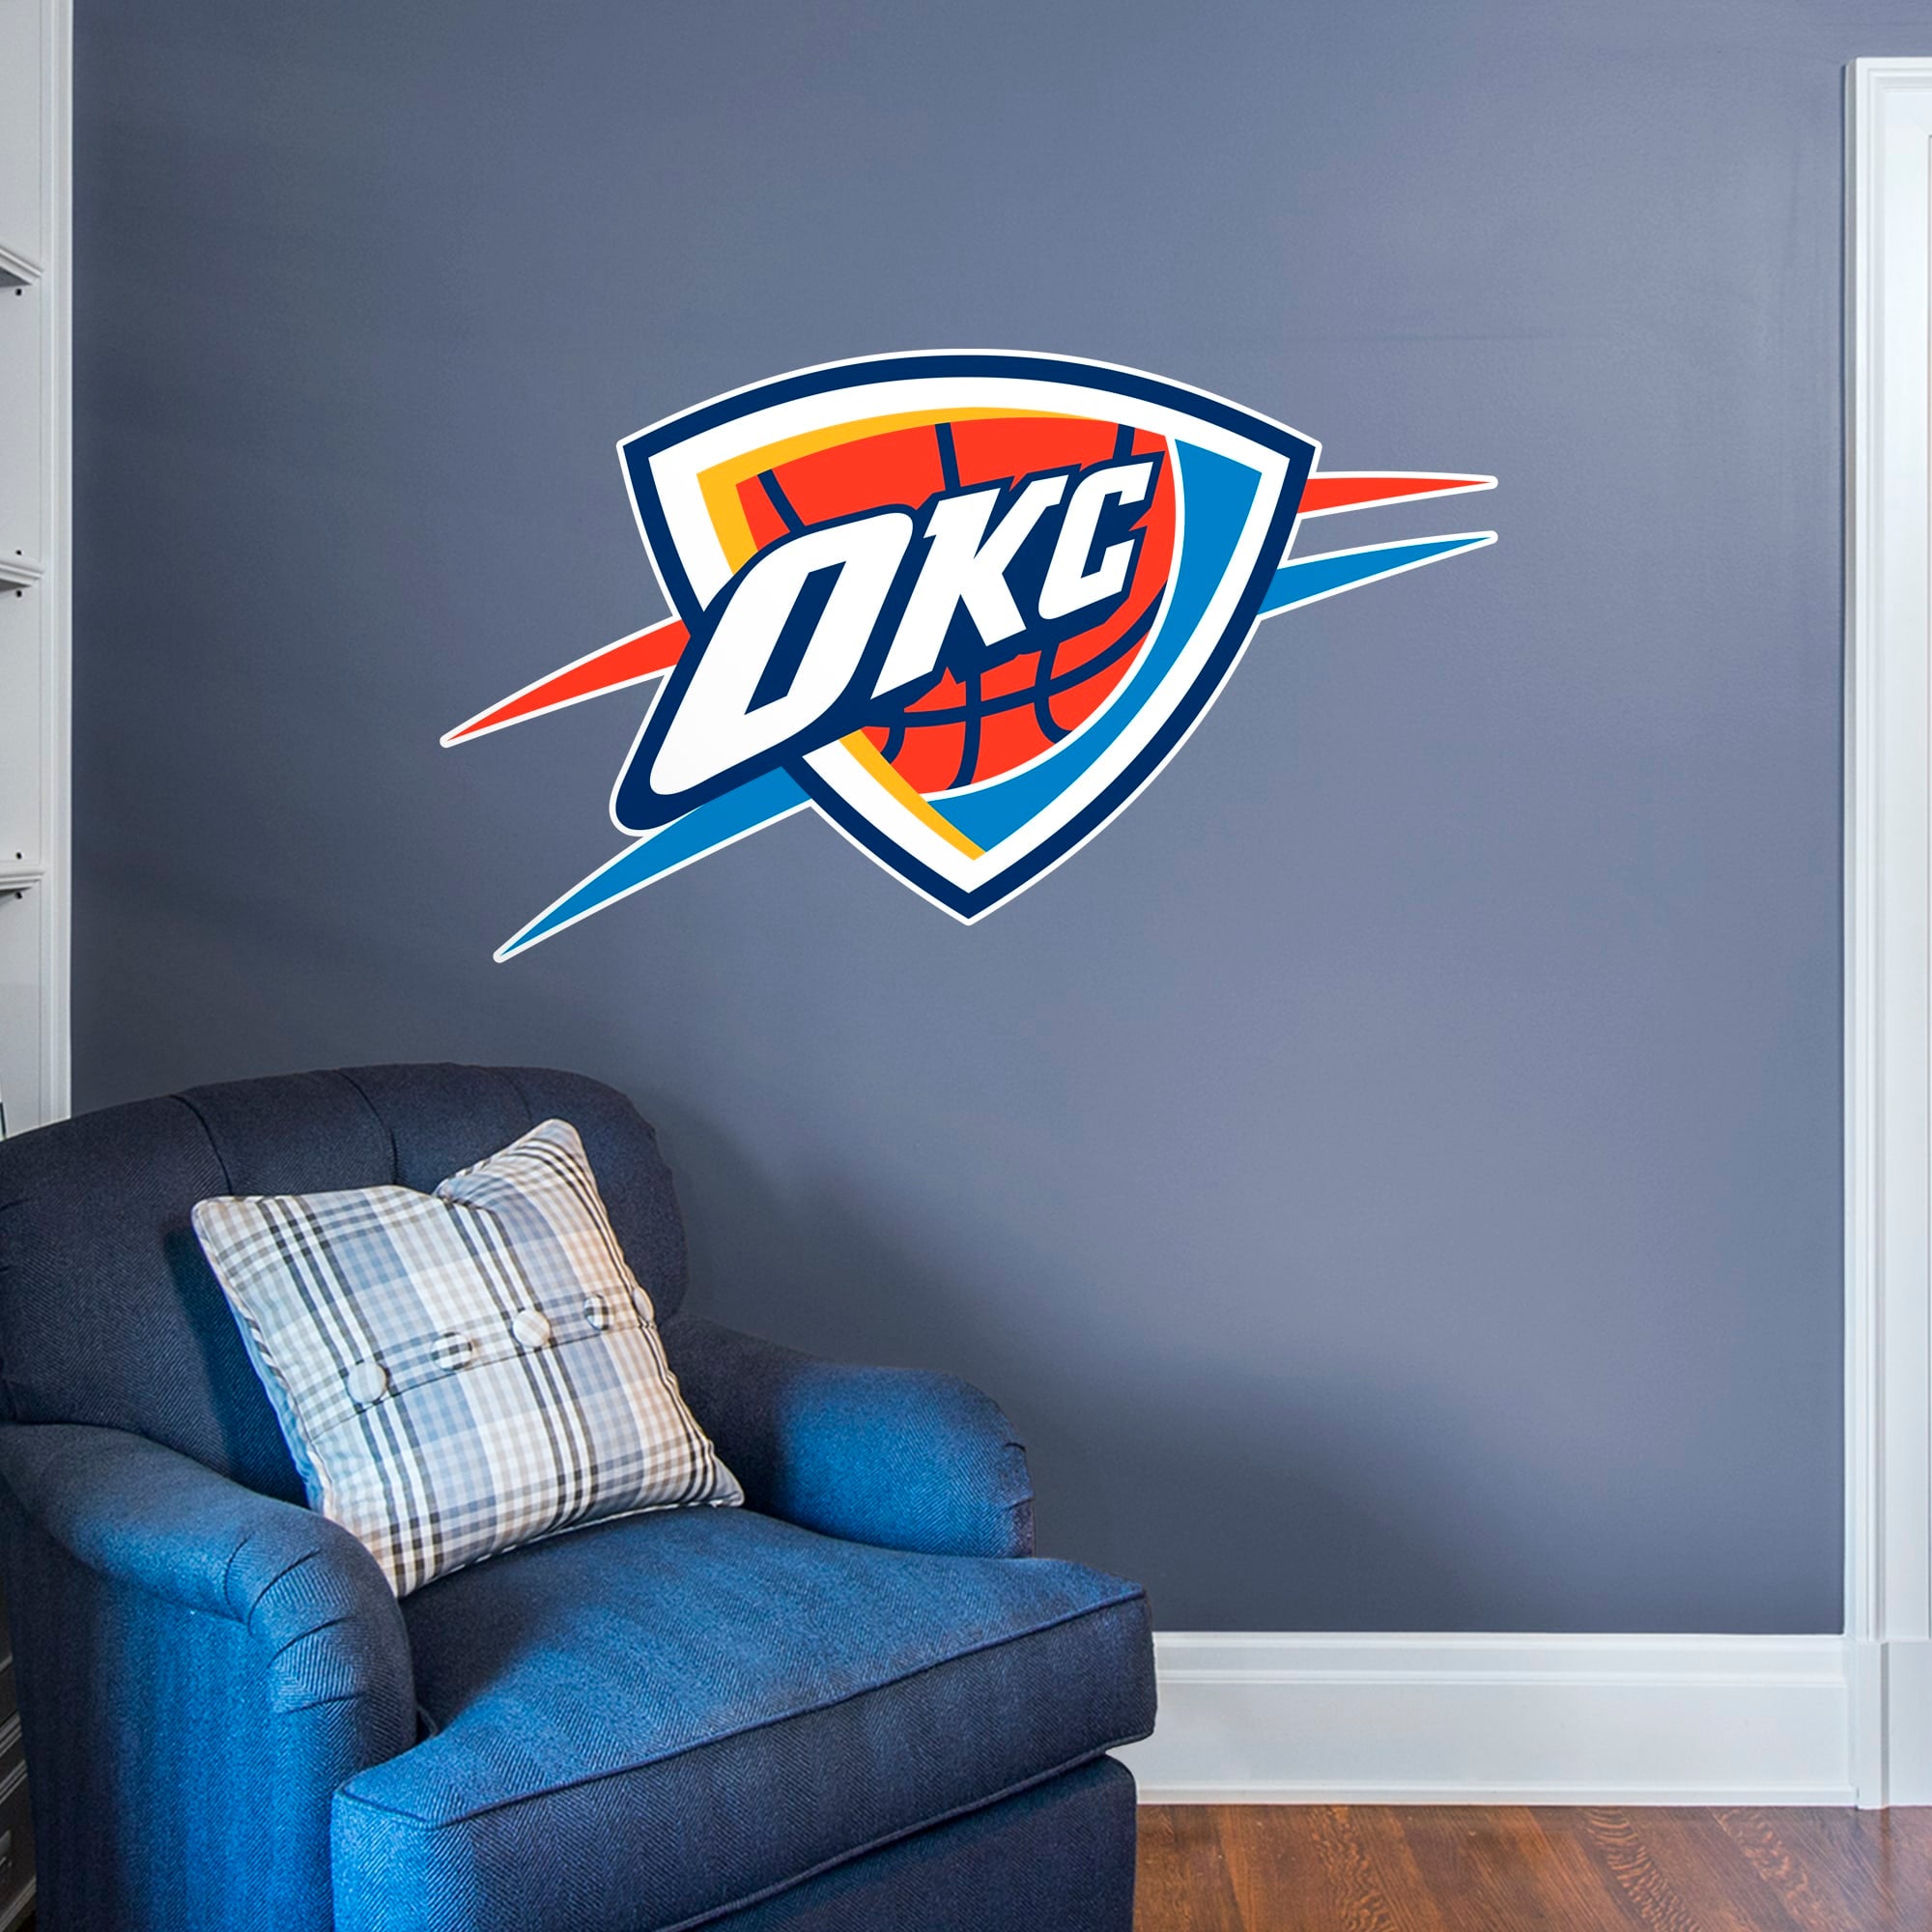 Oklahoma City Thunder: Logo - Officially Licensed NBA Removable Wall Decal Giant Logo + 6 Decals (51"W x 30"H) by Fathead | Viny